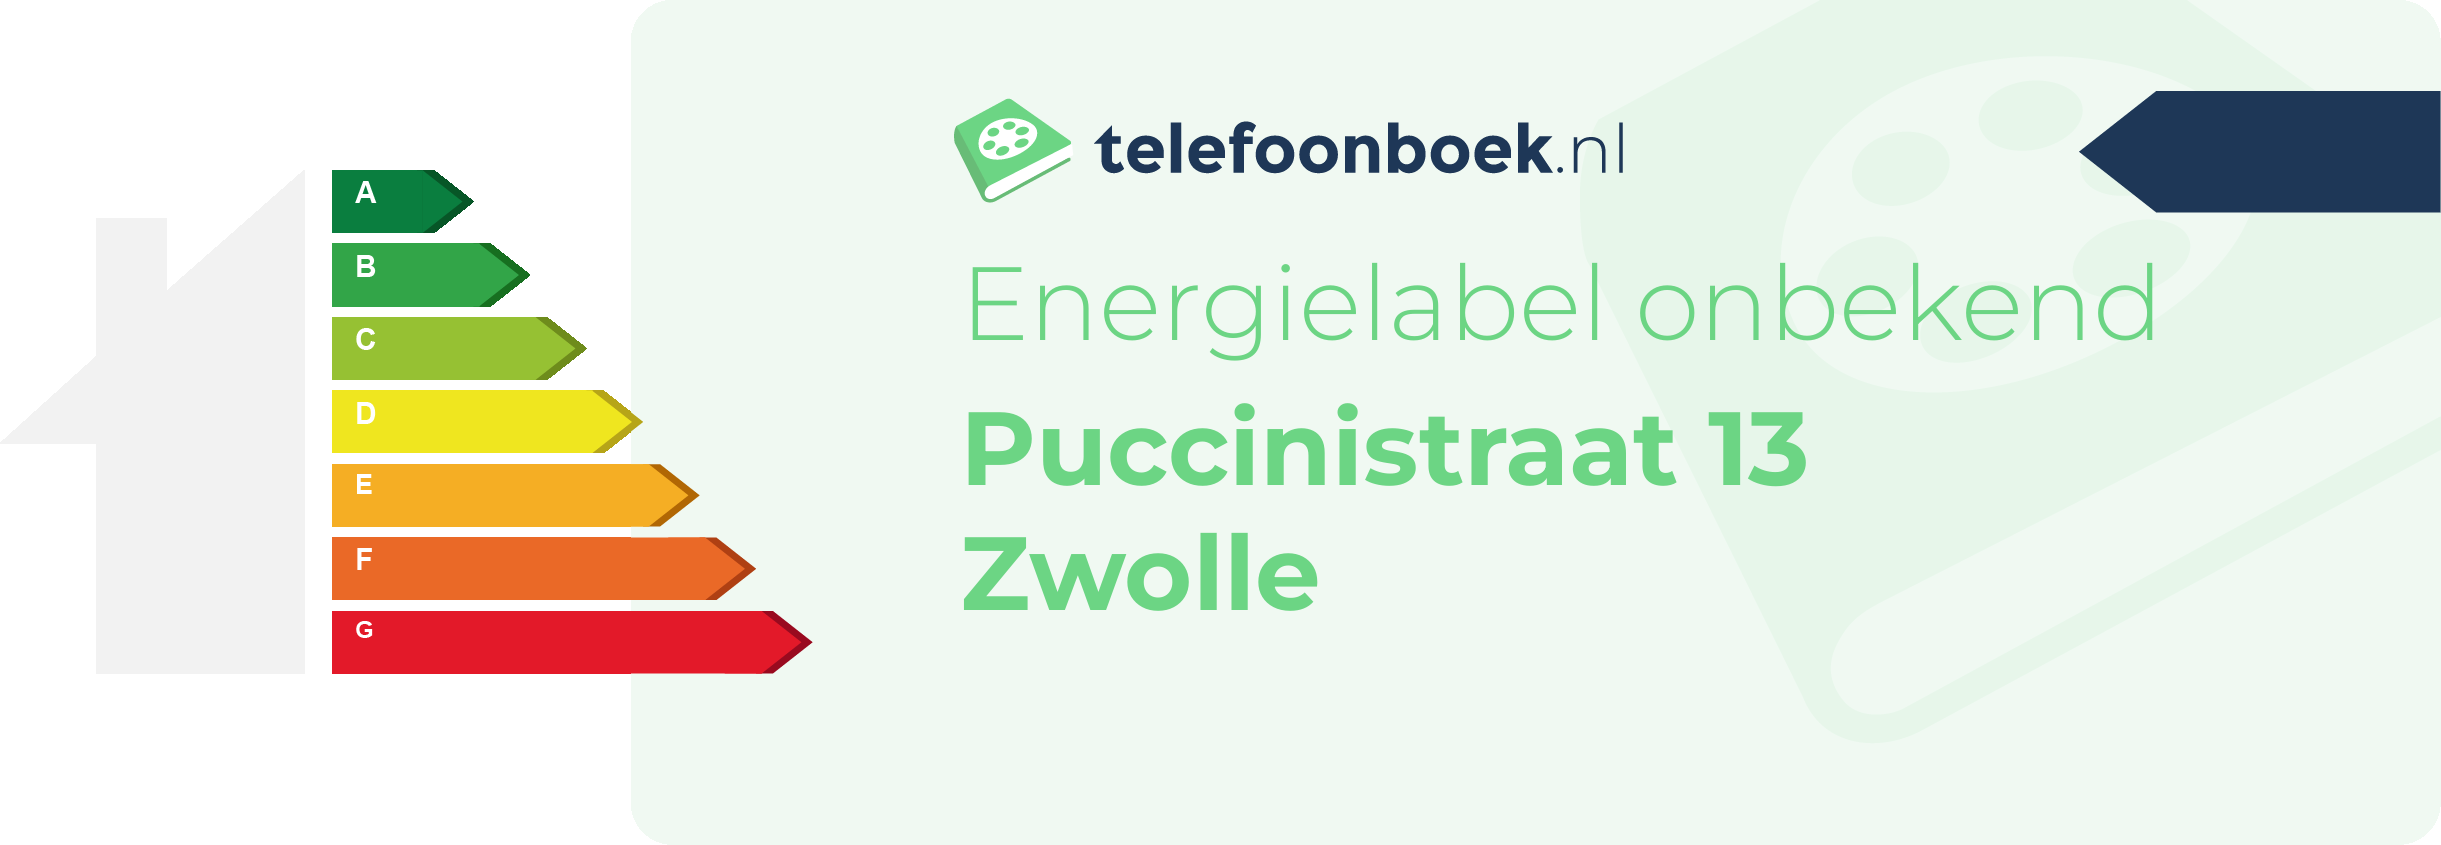 Energielabel Puccinistraat 13 Zwolle